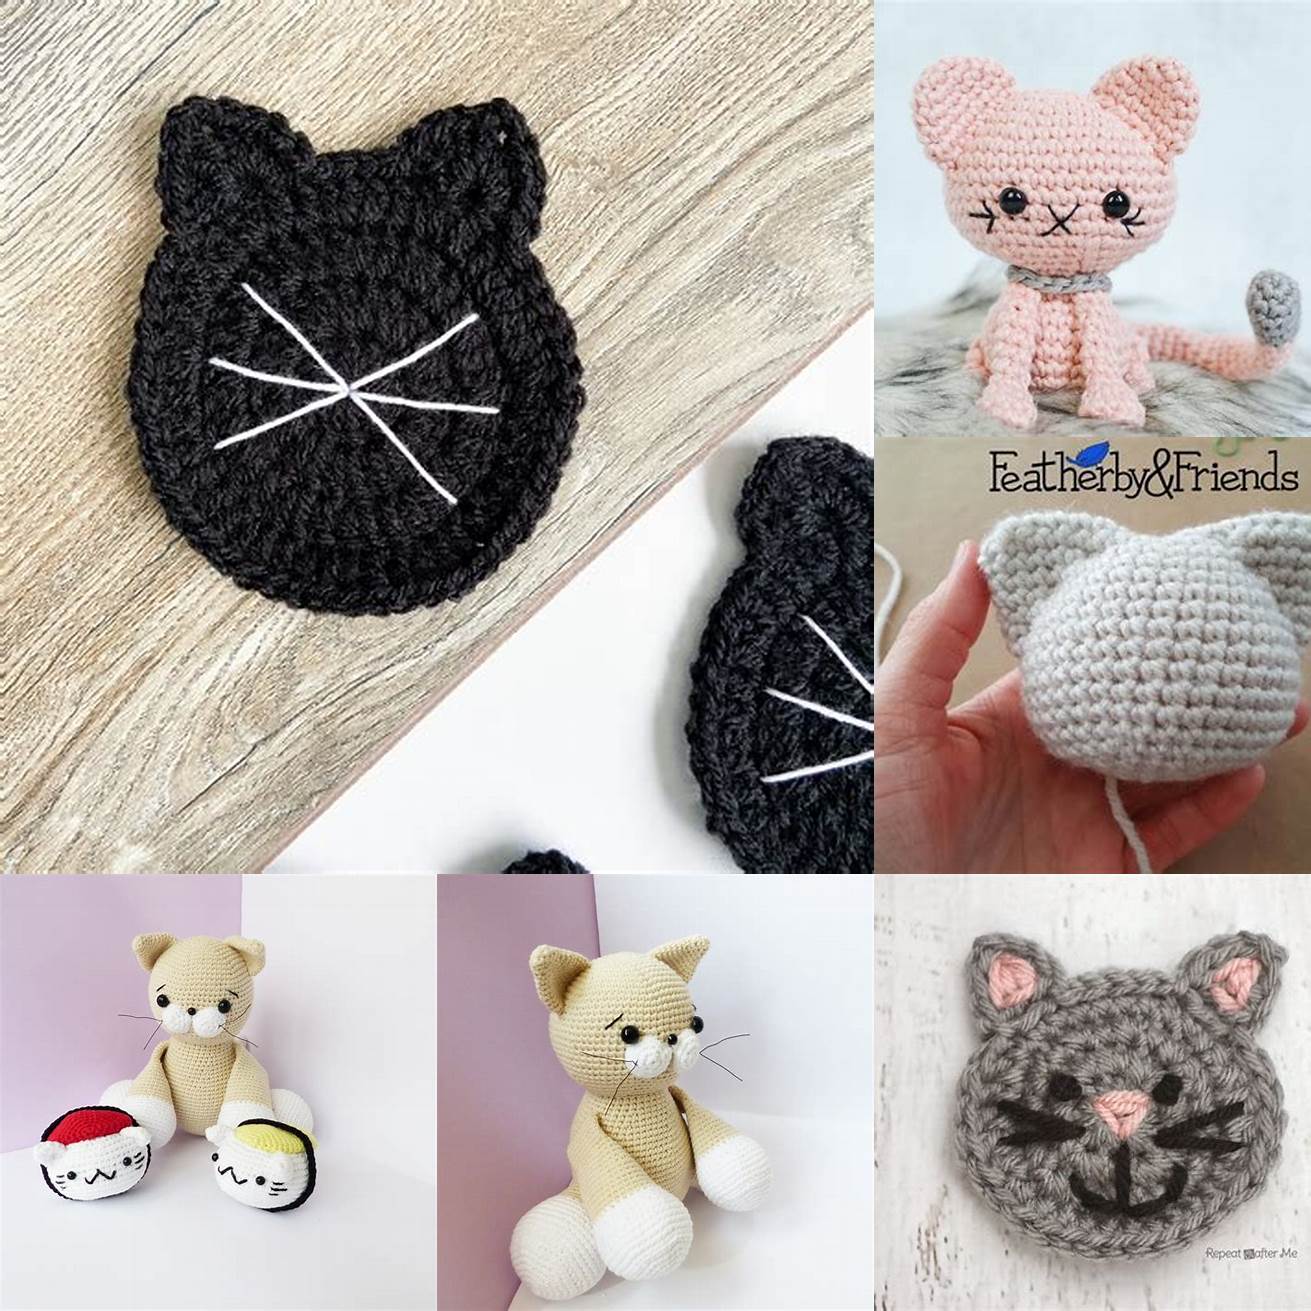 To add the cat details use a different color of yarn to crochet the ears nose and whiskers onto your coaster